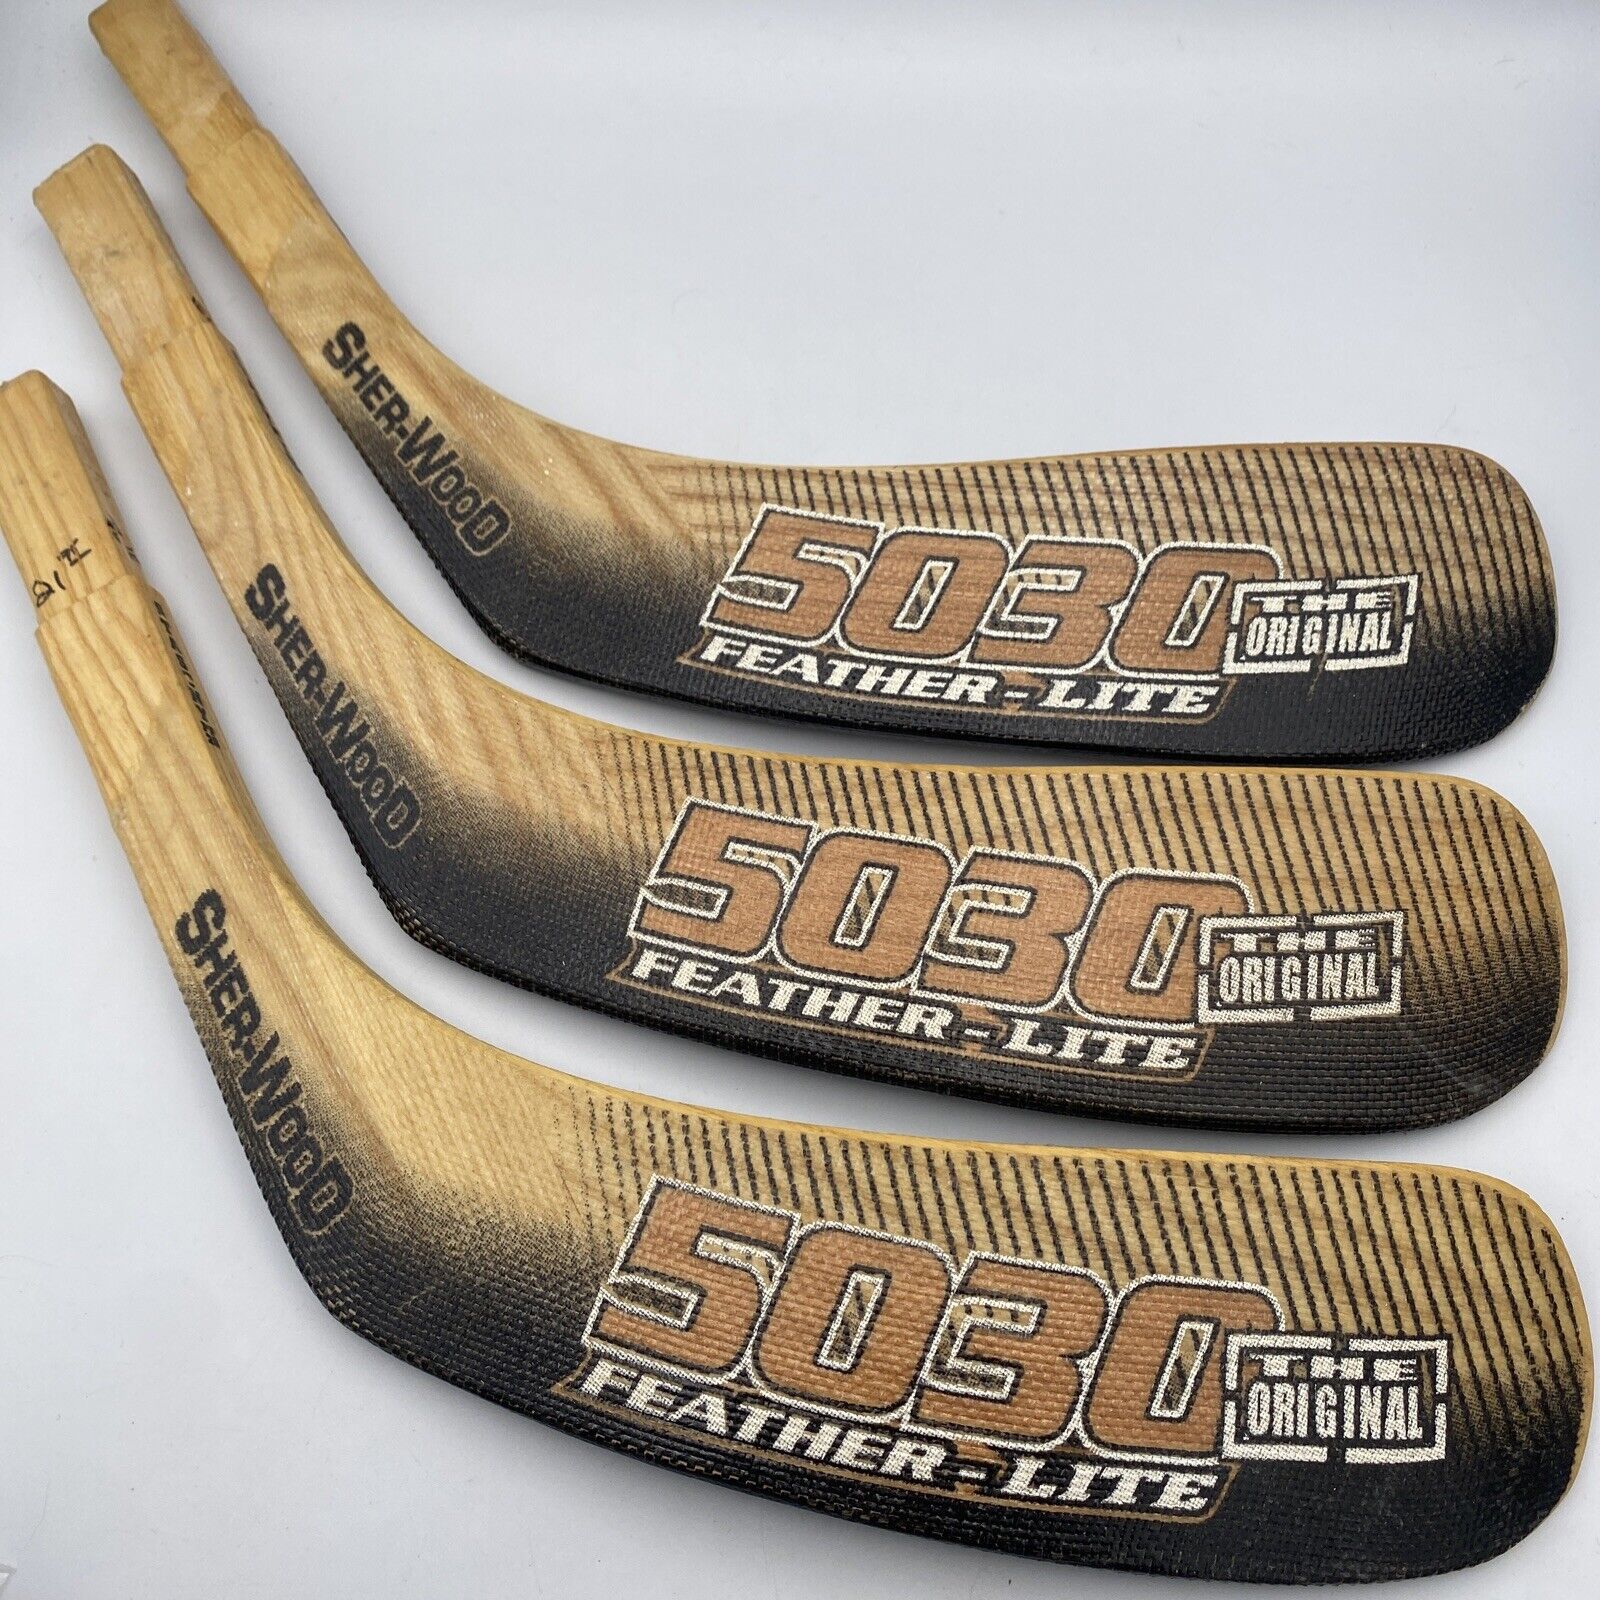 Lot 3 Sher-wood 5030 Feather-lite Replacement Hockey Blade Stastny Pp26 Rh Sr